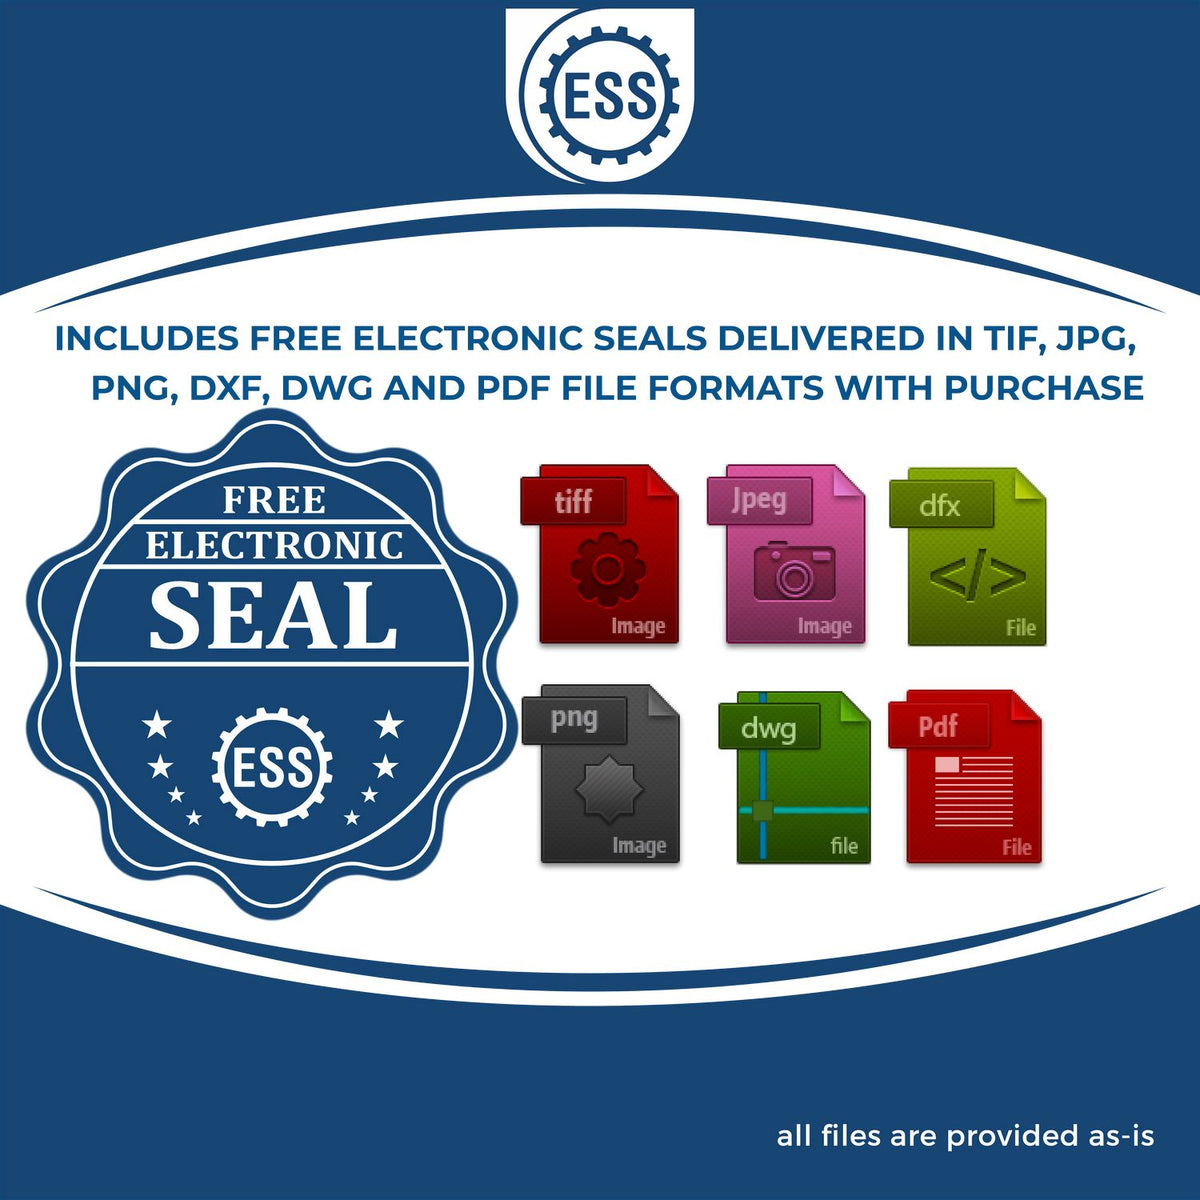 An infographic for the free electronic seal for the Gift Missouri Architect Seal illustrating the different file type icons such as DXF, DWG, TIF, JPG and PNG.